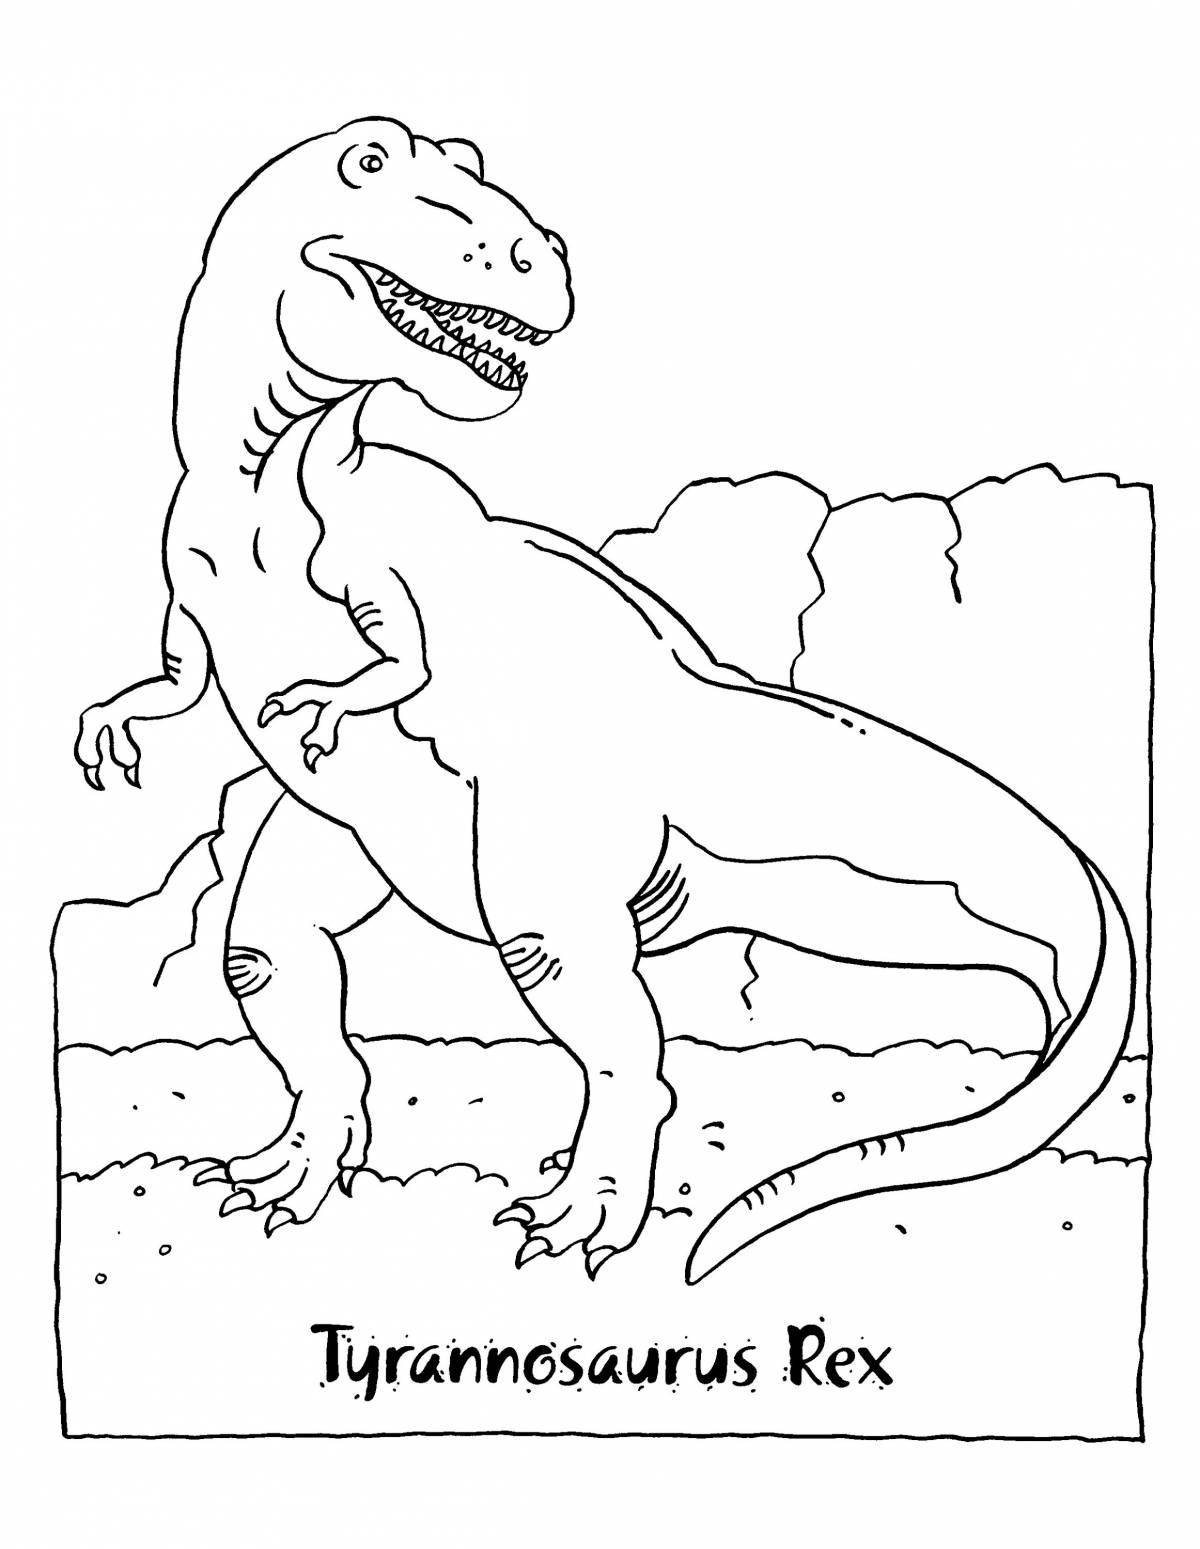 Vibrant Tyrannosaurus Rex Coloring Page for Kids